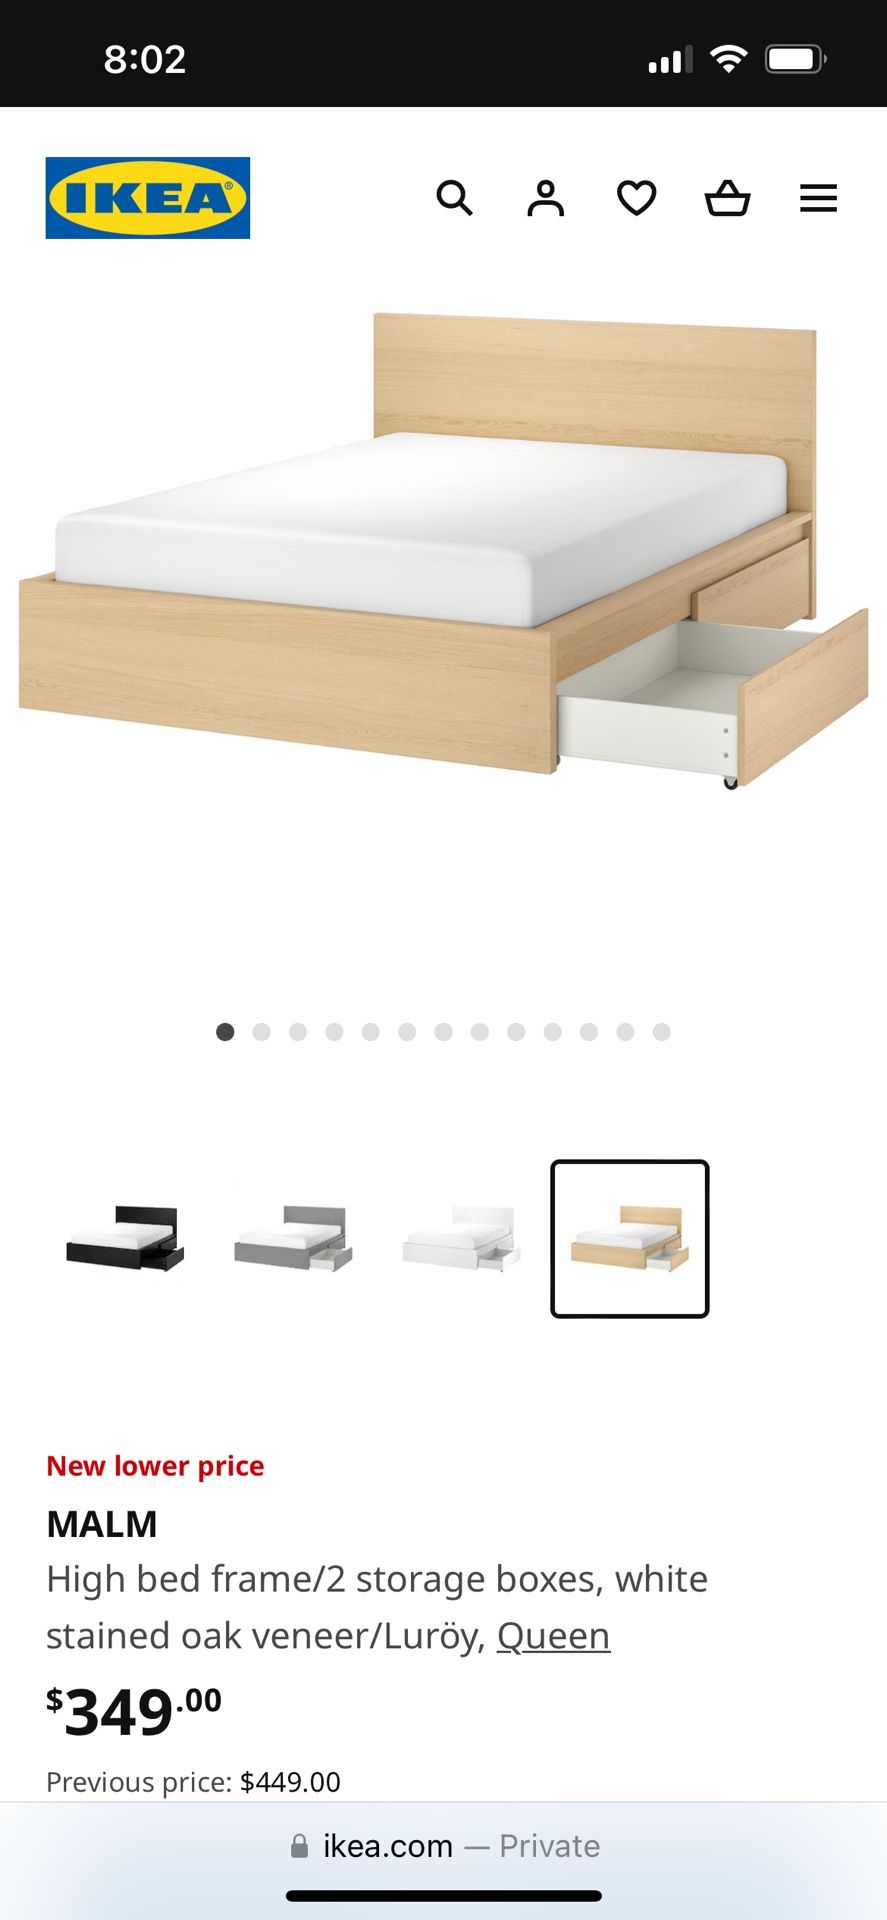 Queen IKEA MALM High bed frame/2 storage boxes